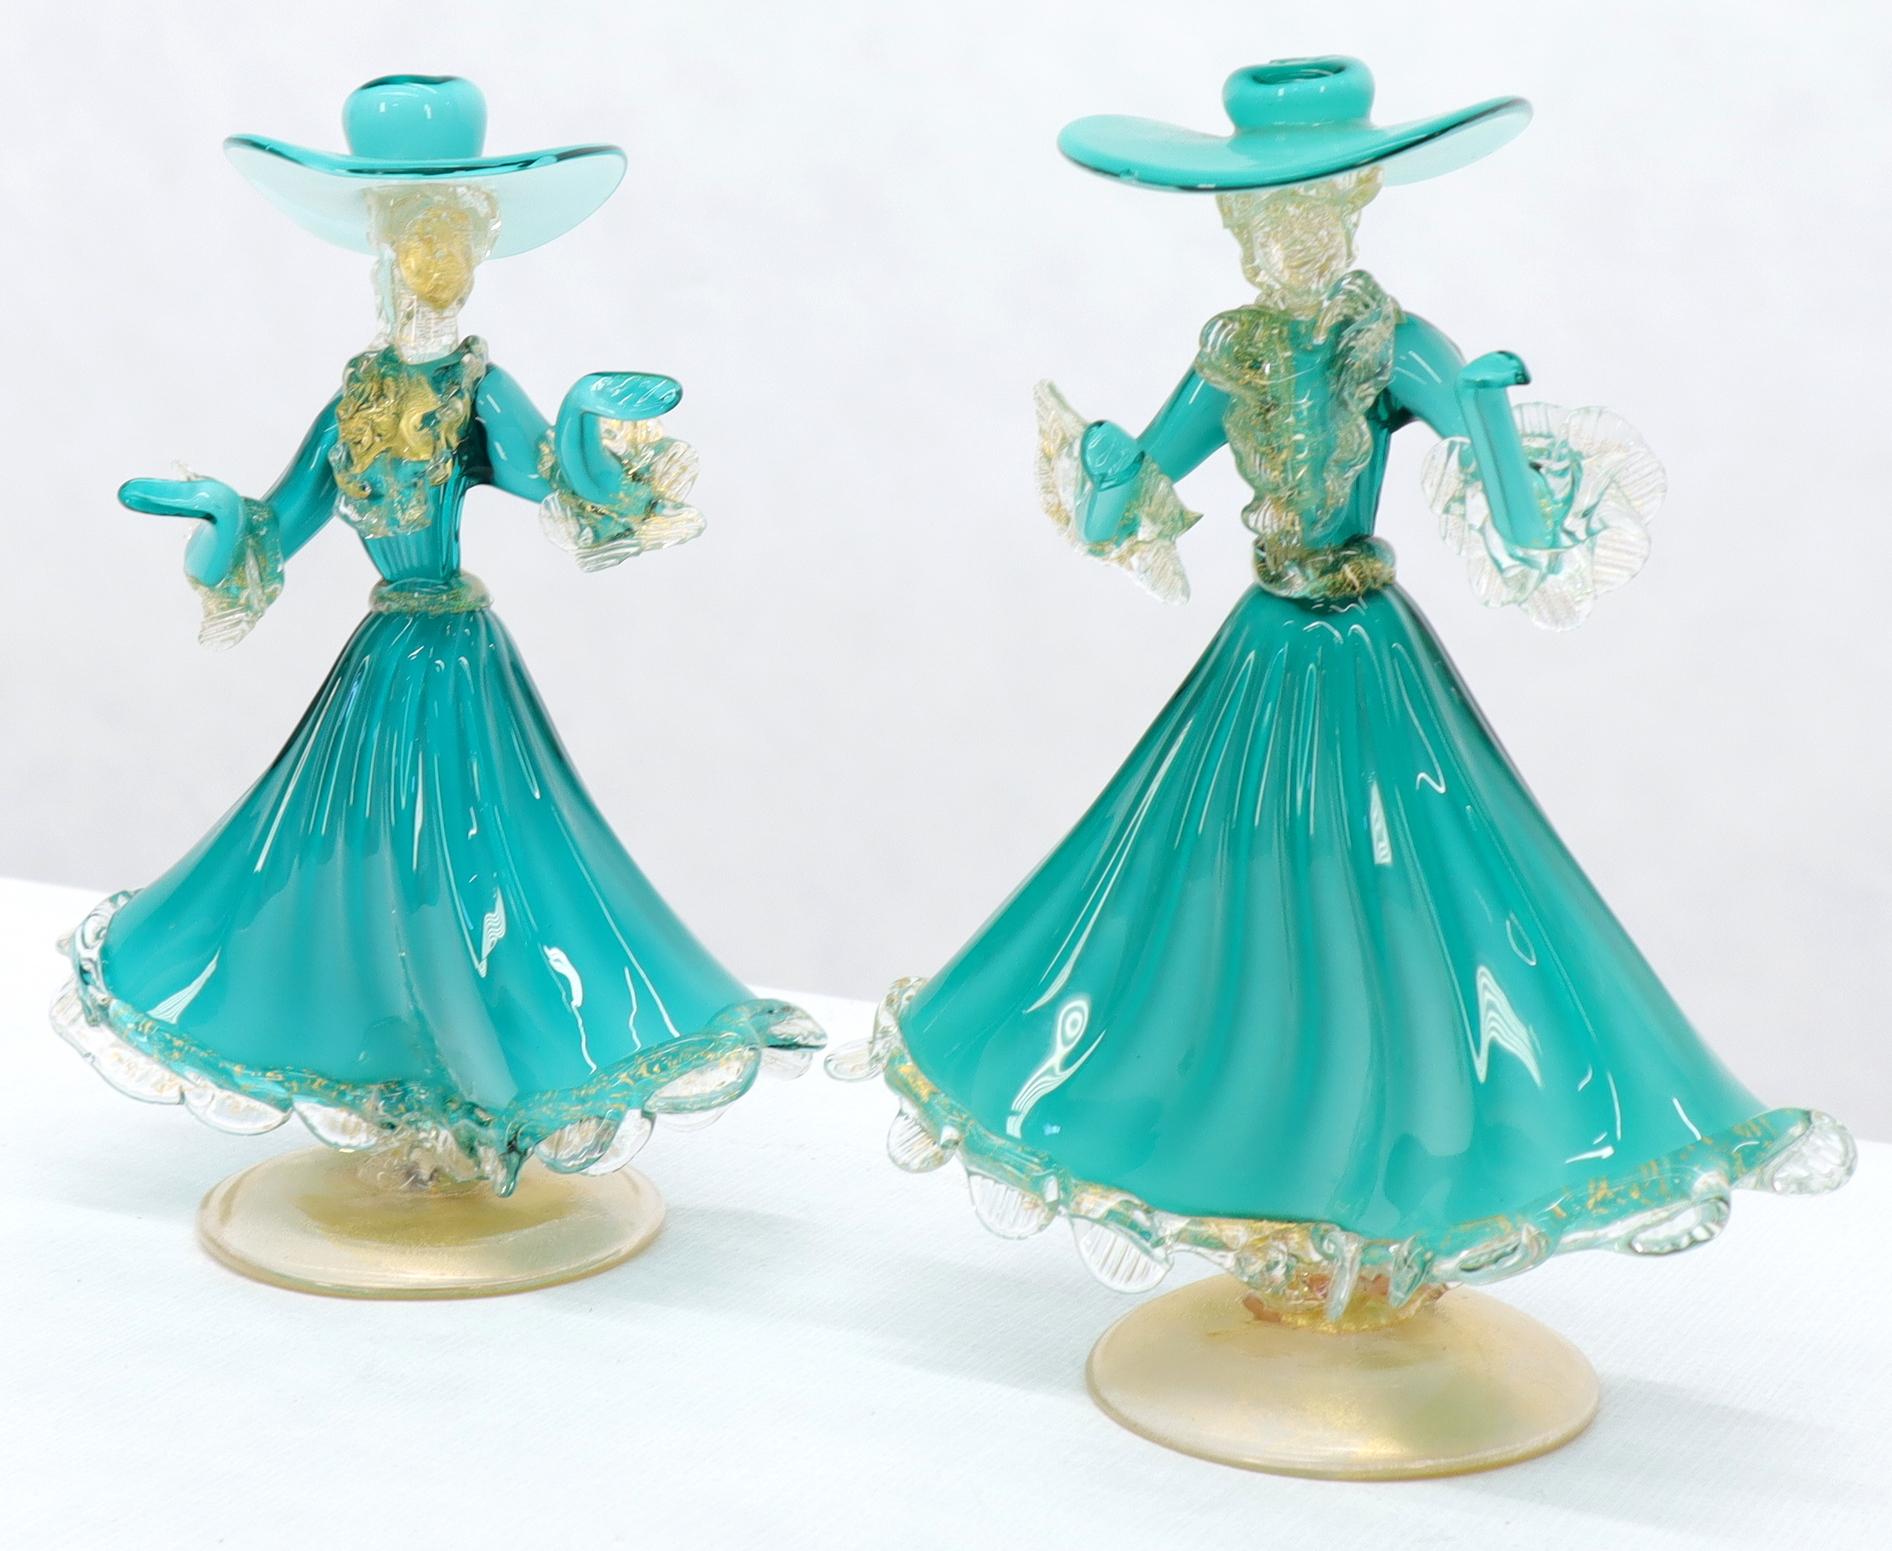 Pair of Murano glass green dresses dancing lady figurines.